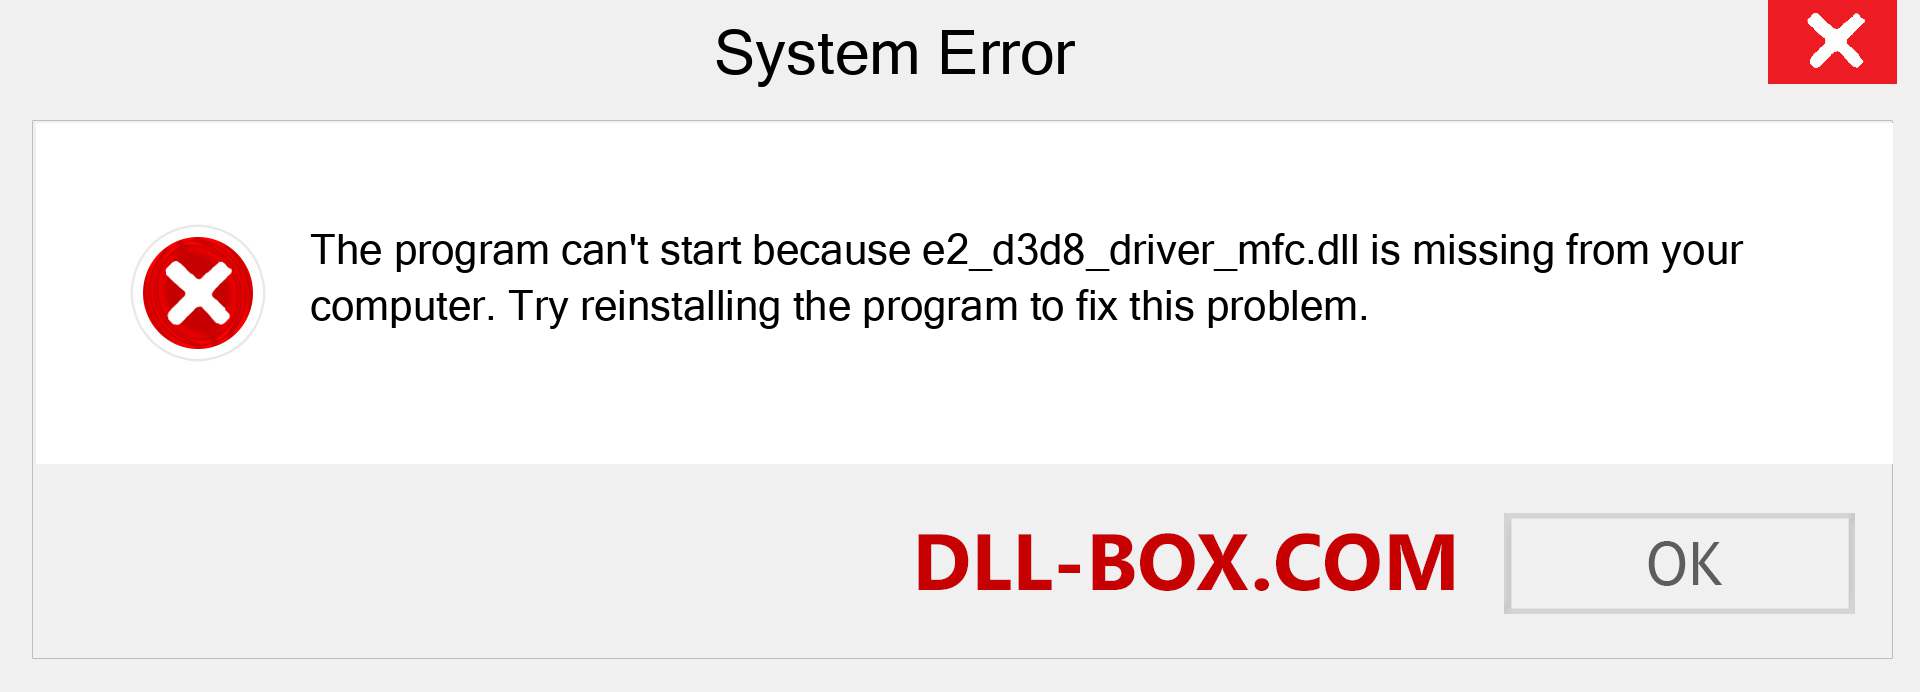  e2_d3d8_driver_mfc.dll file is missing?. Download for Windows 7, 8, 10 - Fix  e2_d3d8_driver_mfc dll Missing Error on Windows, photos, images